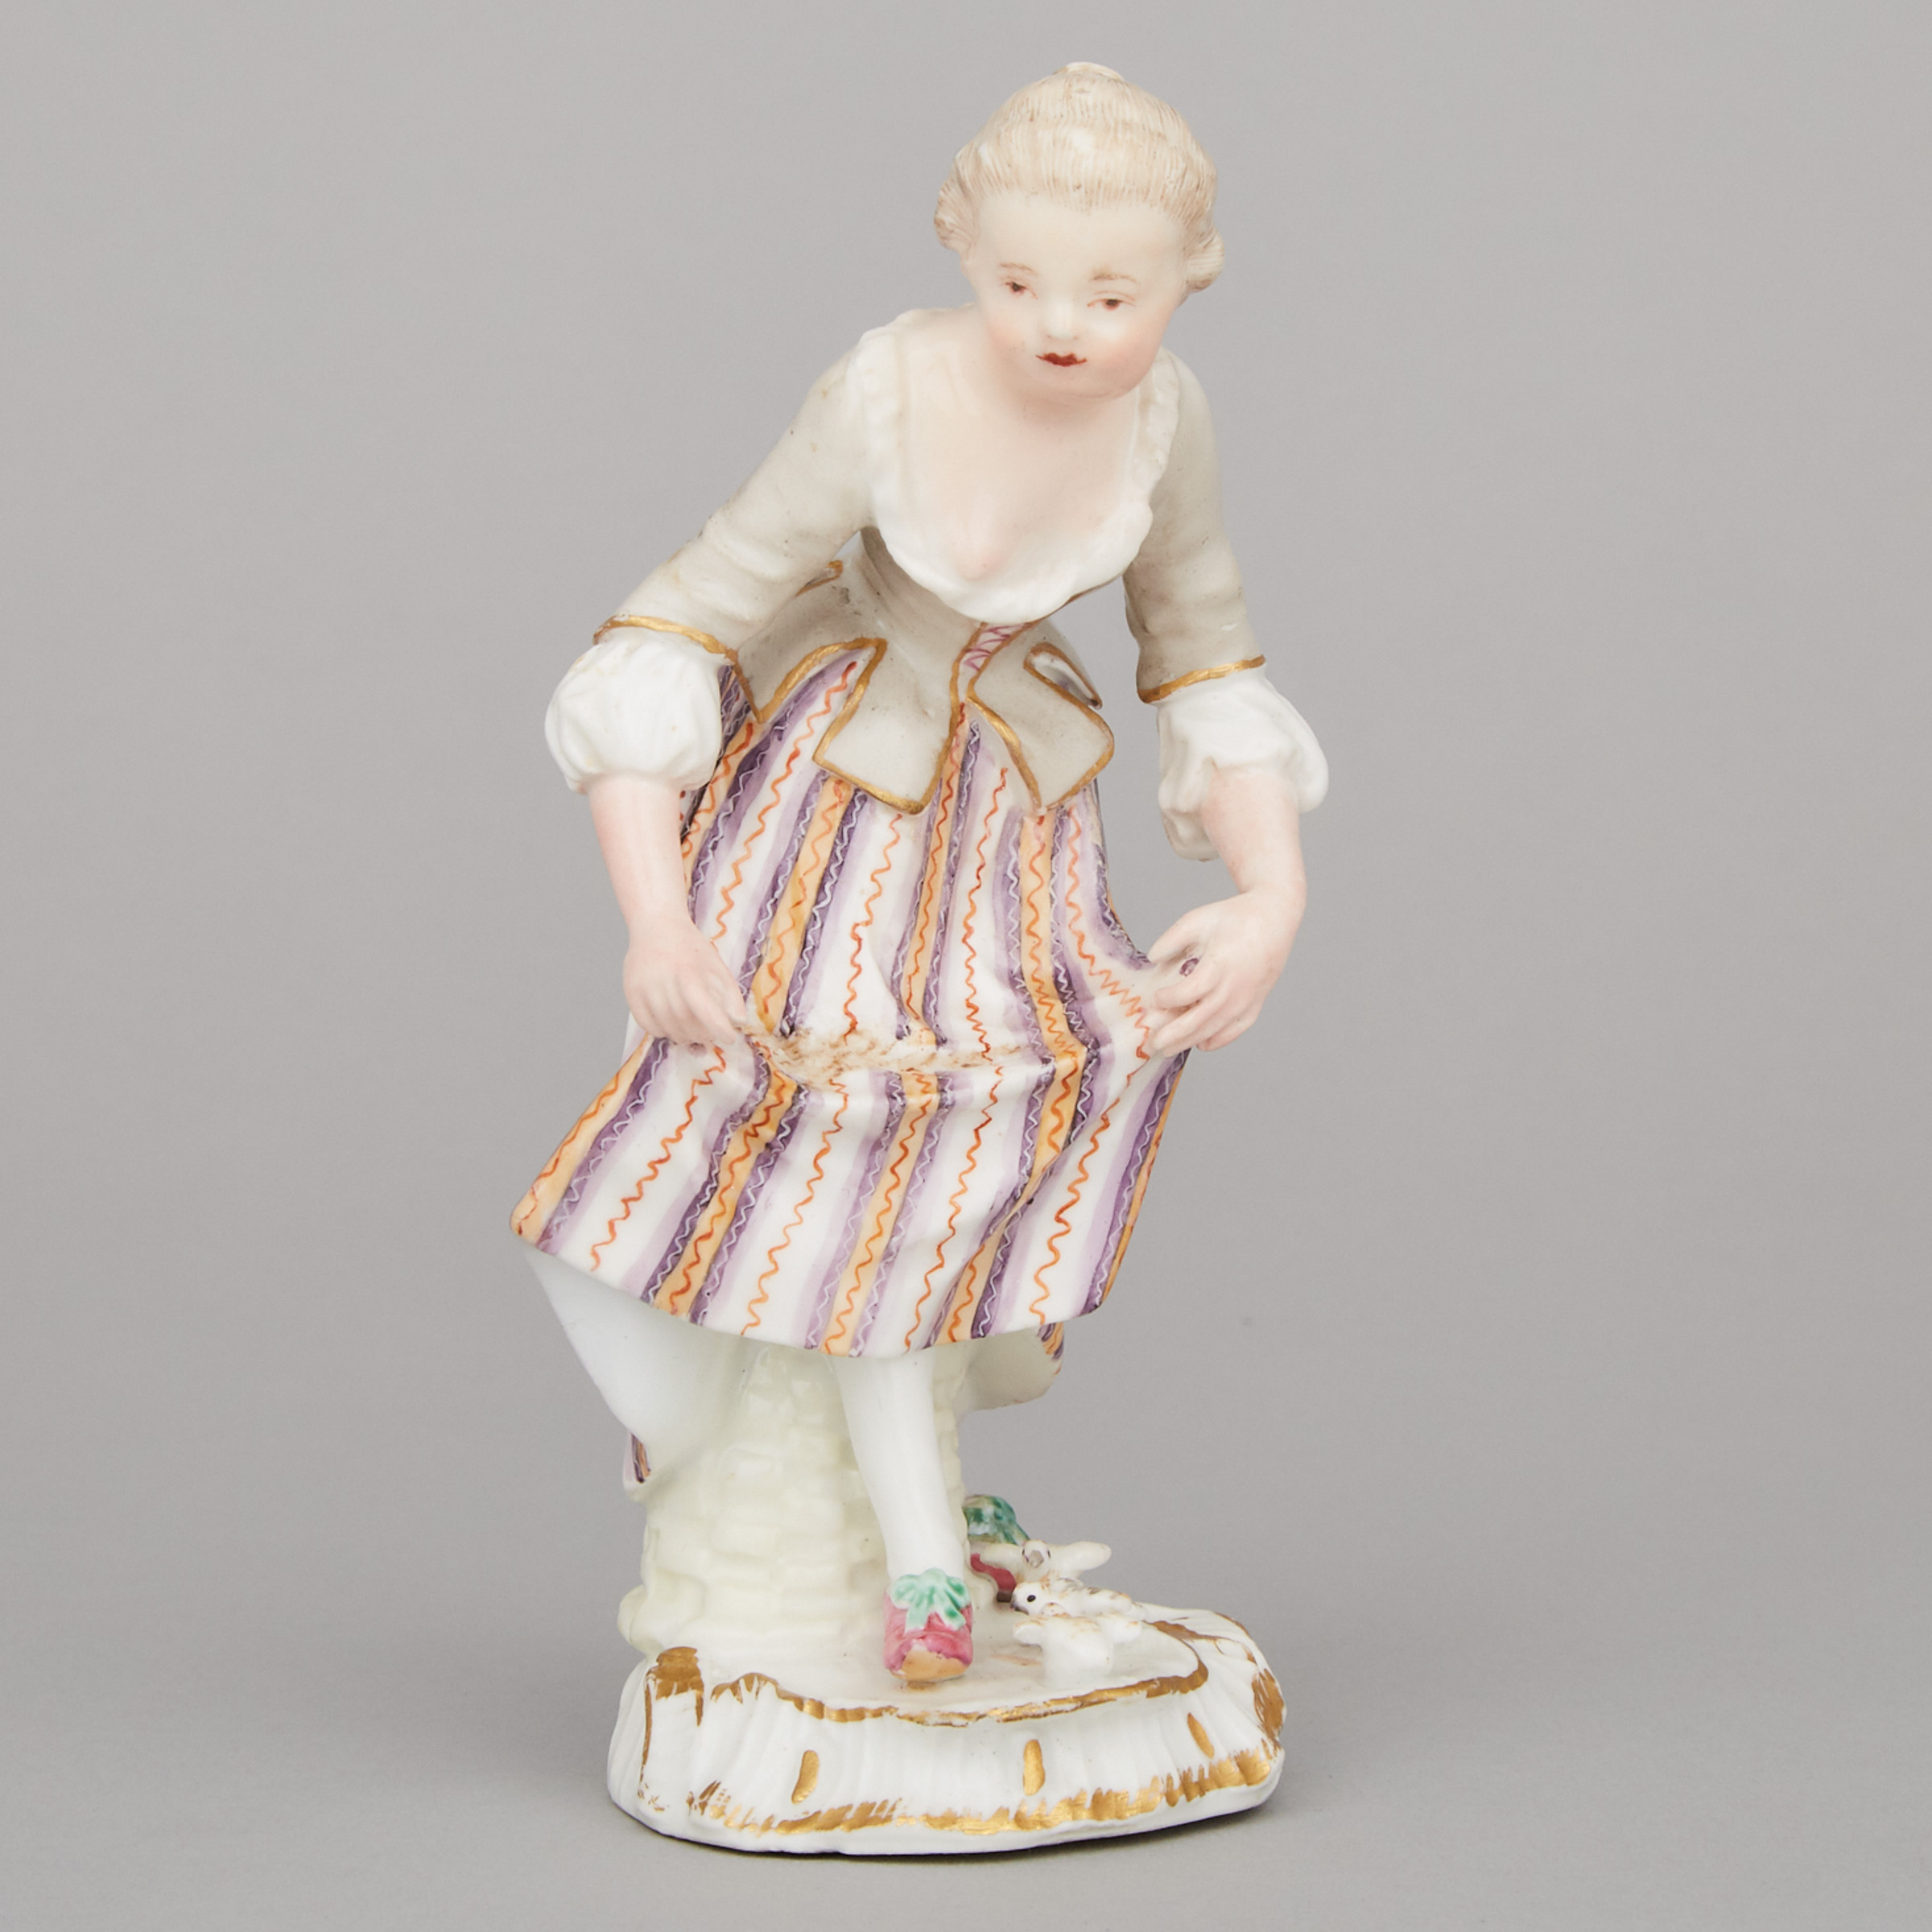 Meissen Figure of a Woman Feeding Chicks, late 18th/early 19th century